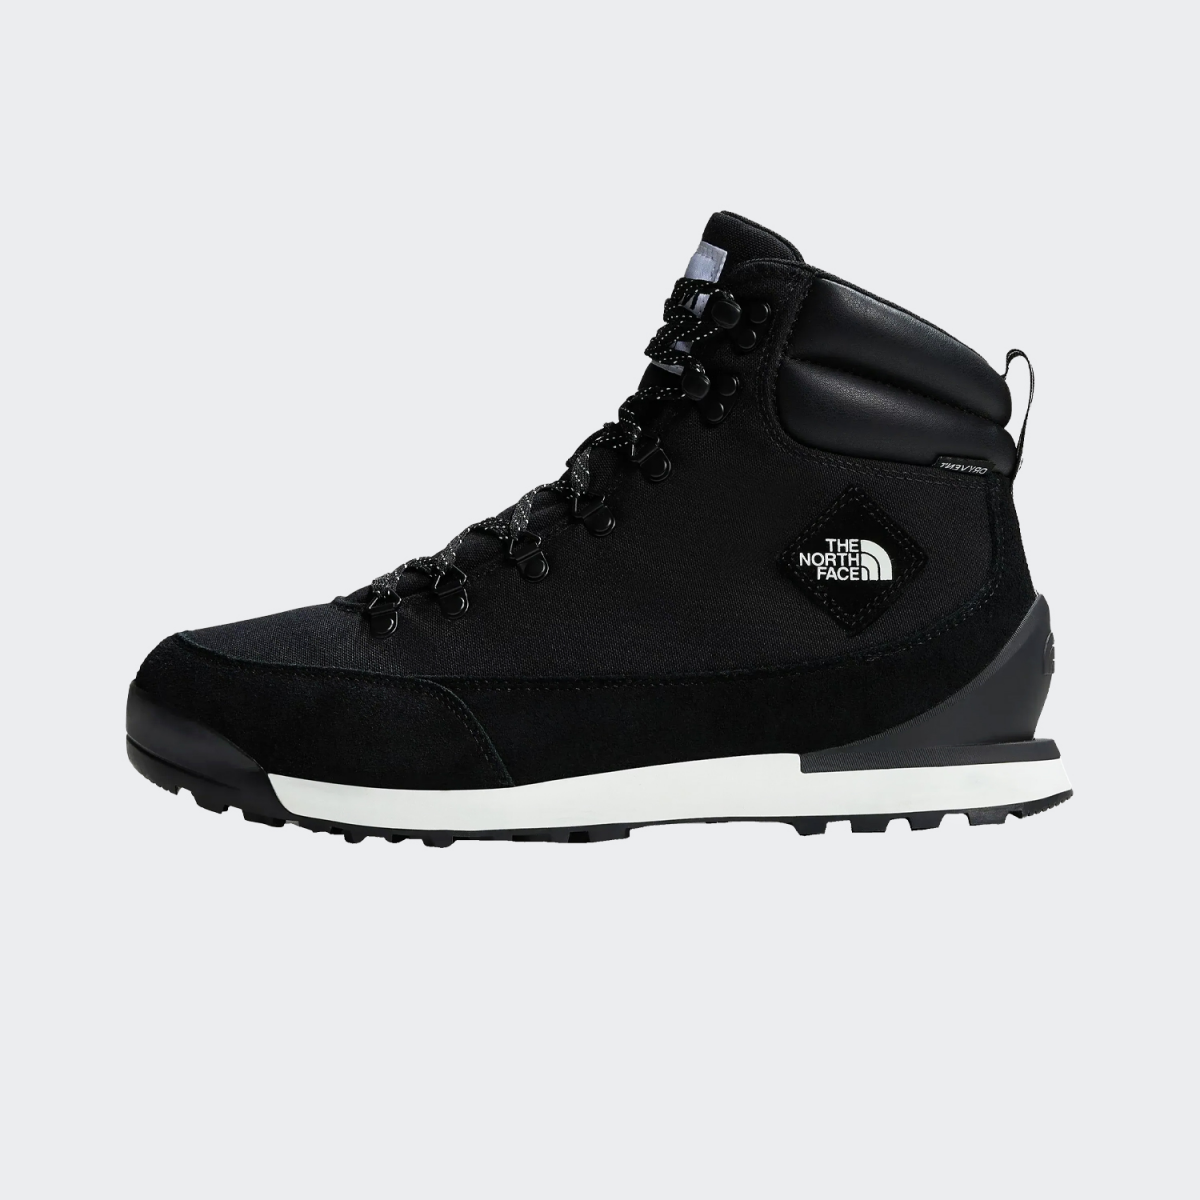 The North Face Boots Black - NF0A8177KY41_9 | Urban Project